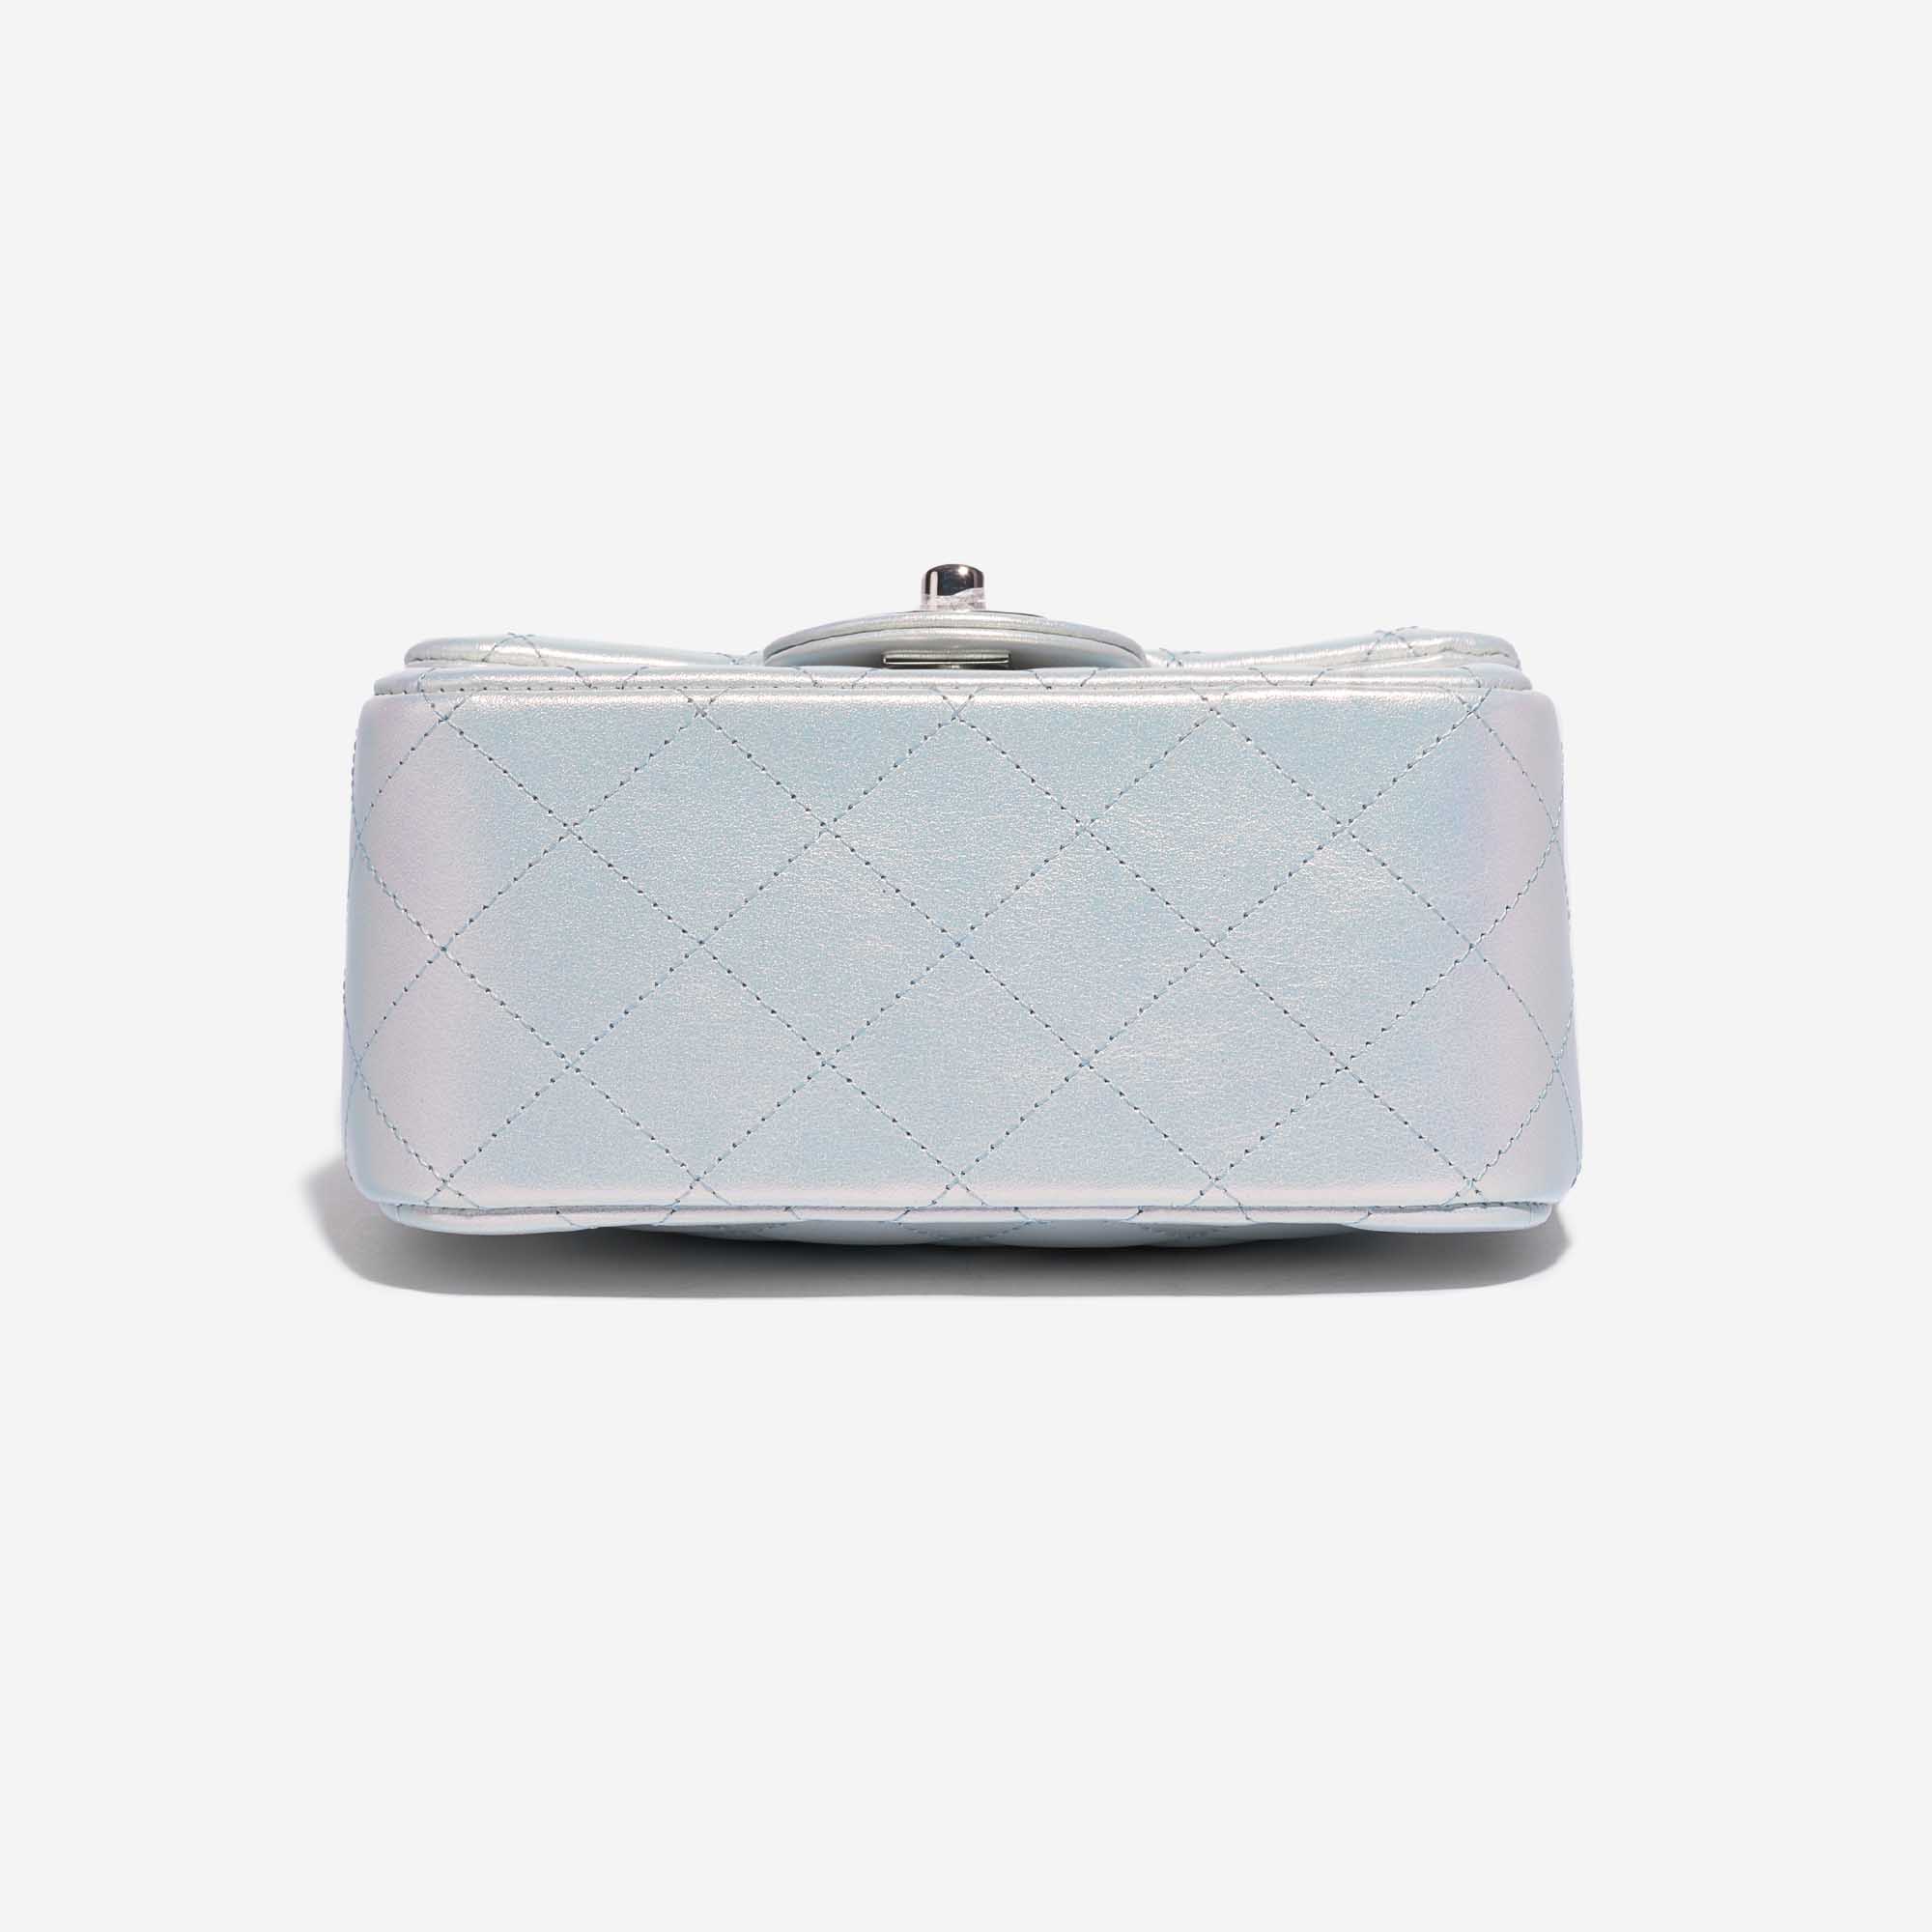 Pre-owned Chanel bag Timeless Square Mini Lamb Blue Iridescent Blue Bottom | Sell your designer bag on Saclab.com